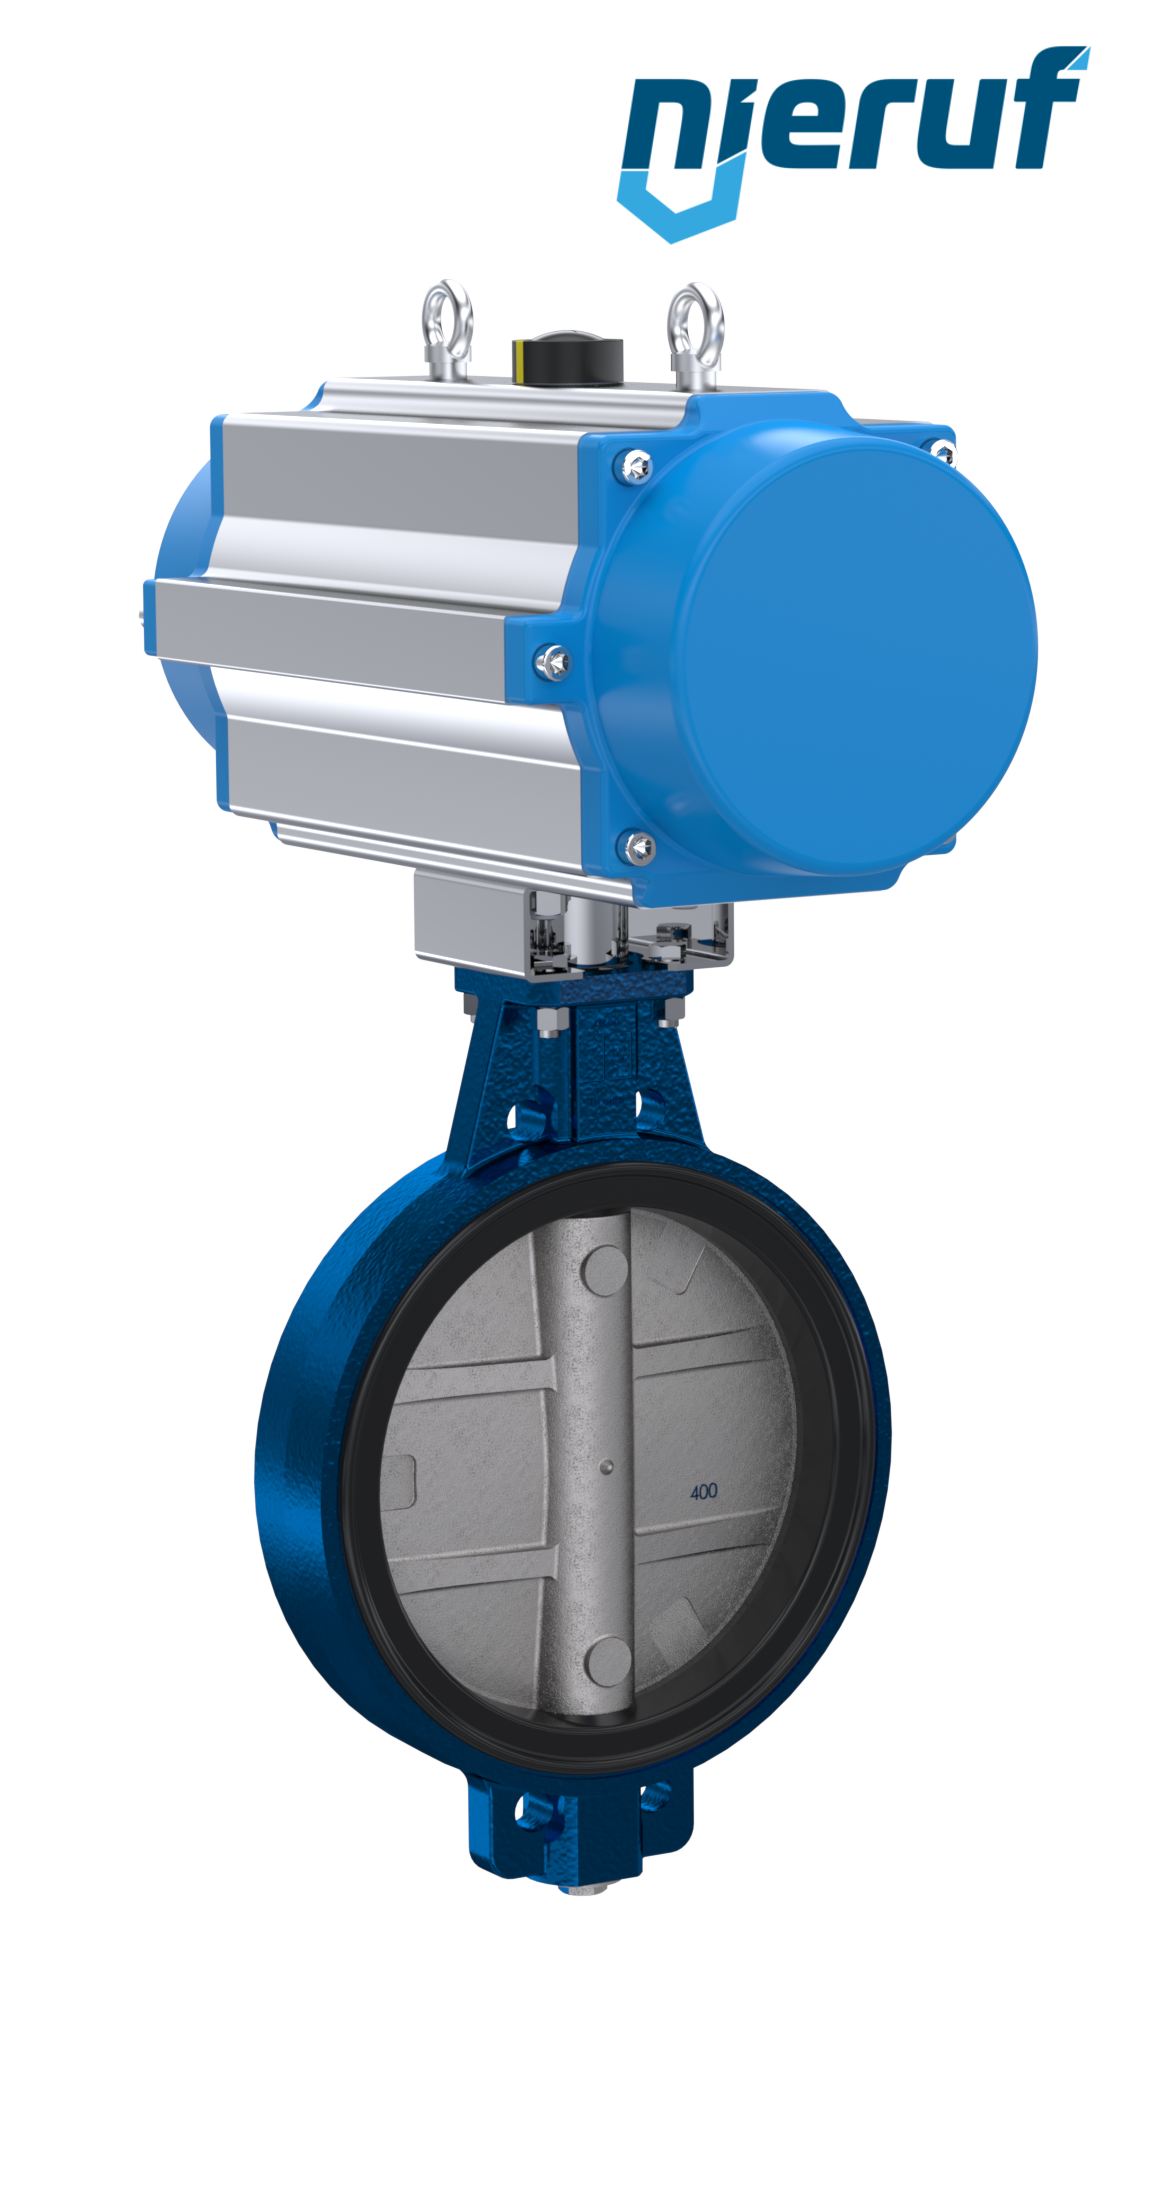 Butterfly valve DN 400 AK01 EPDM DVGW drinking water, WRAS, ACS, W270 pneumatic actuator single acting normally closed